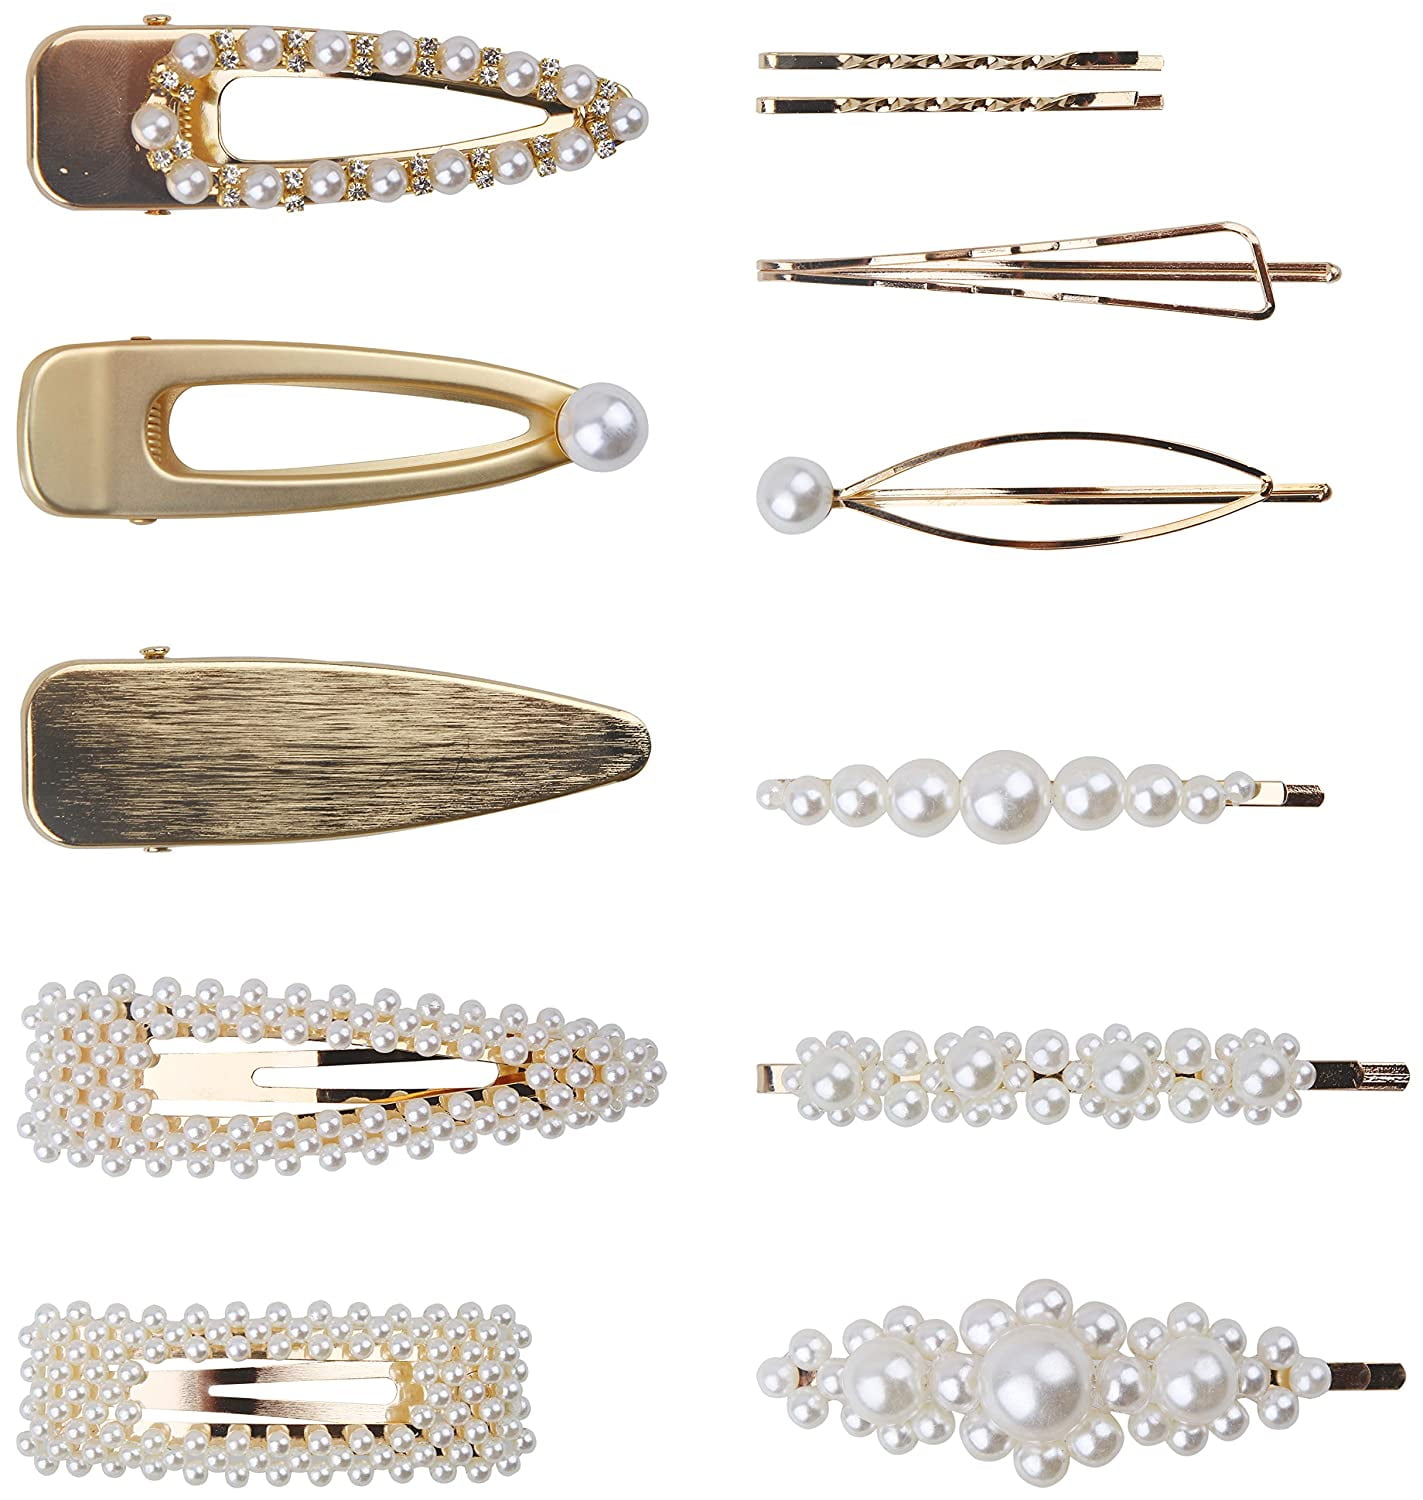 Details about   Womens Pearl Hair Clips Hairpin Barrette Stick Bobby Pin Hair Accessories Set 